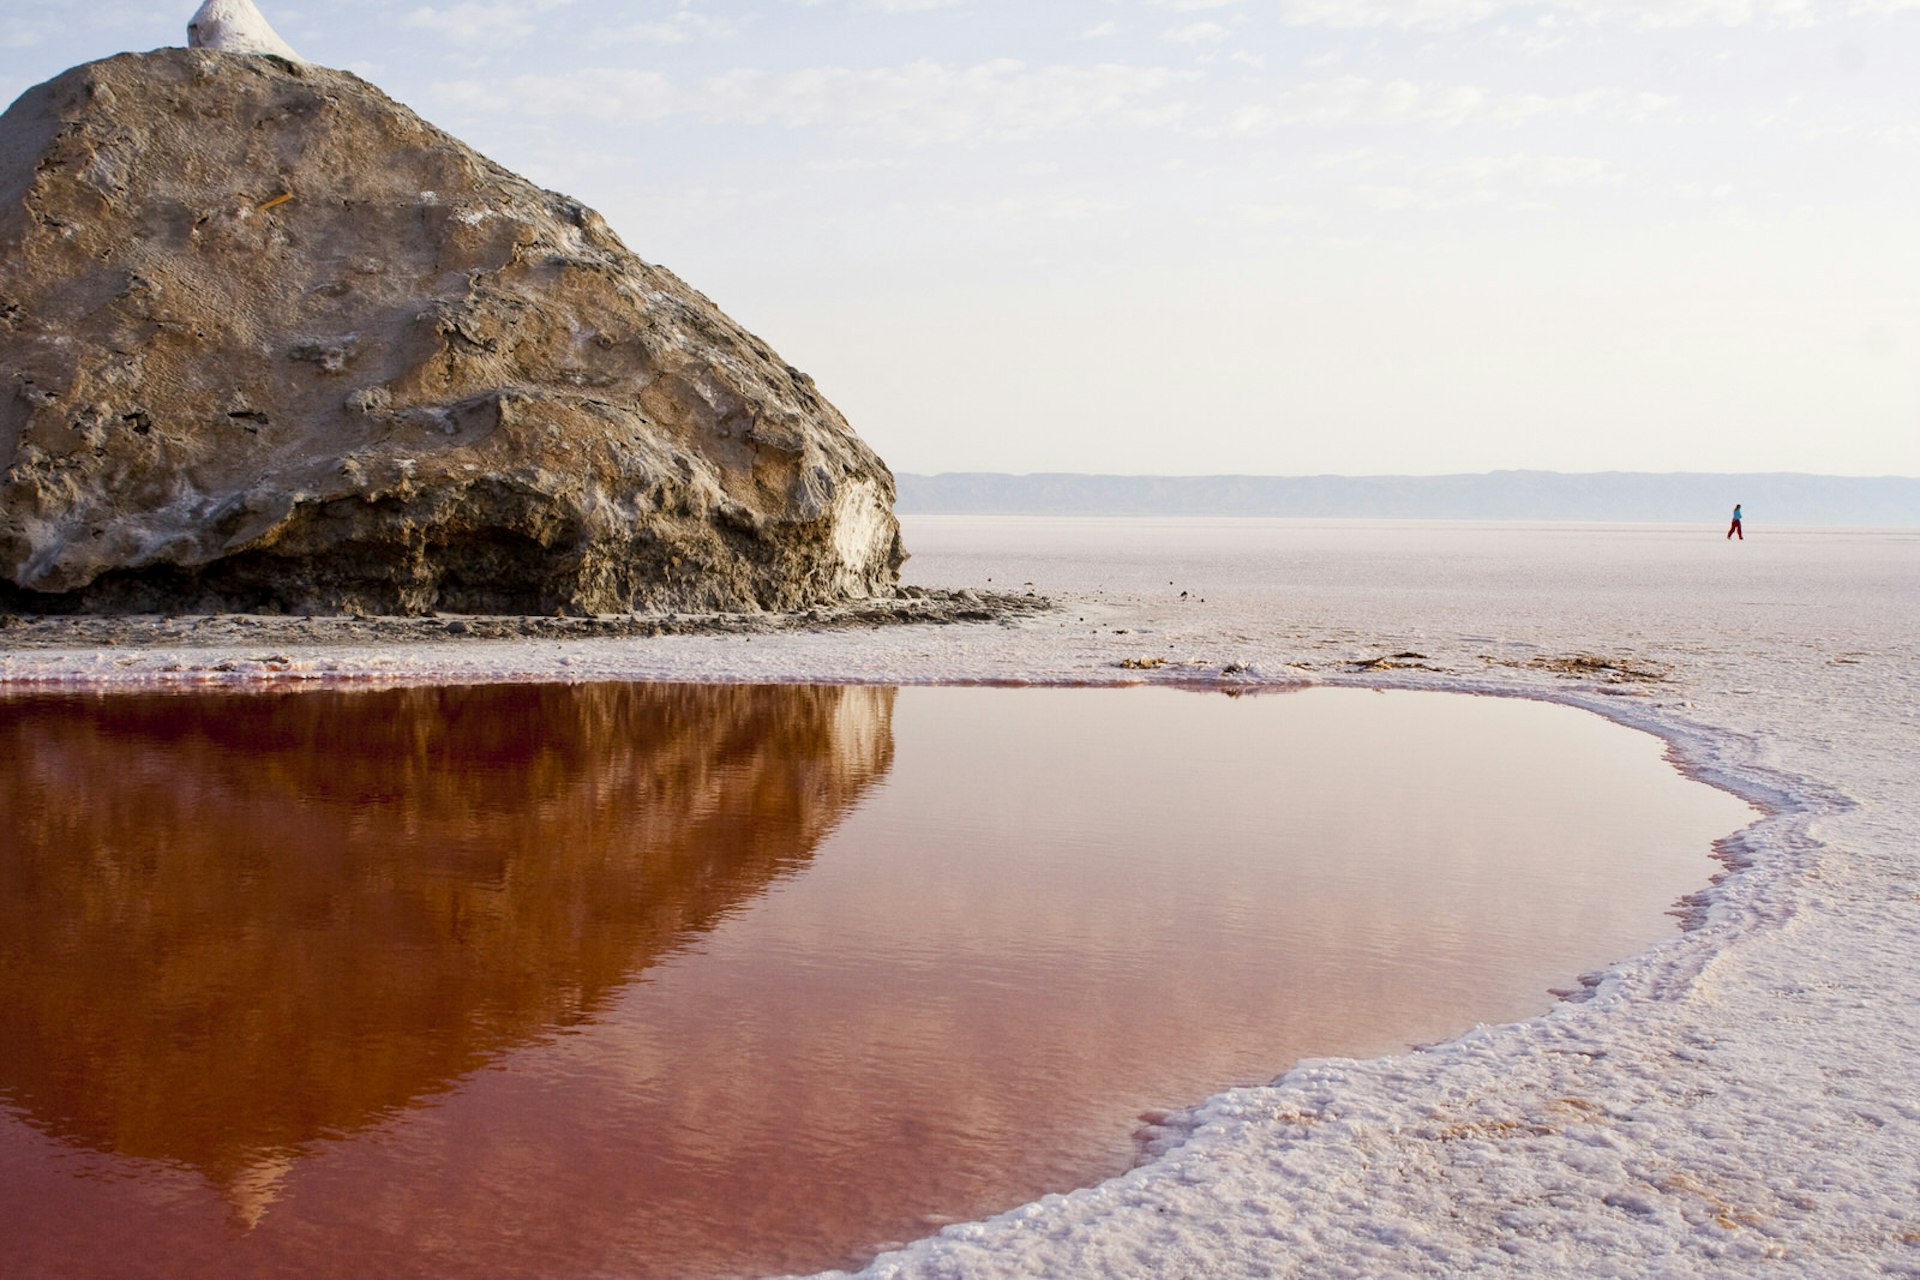 Pool of pink water at the salty lakes of Chott El Jerid, Tunisia